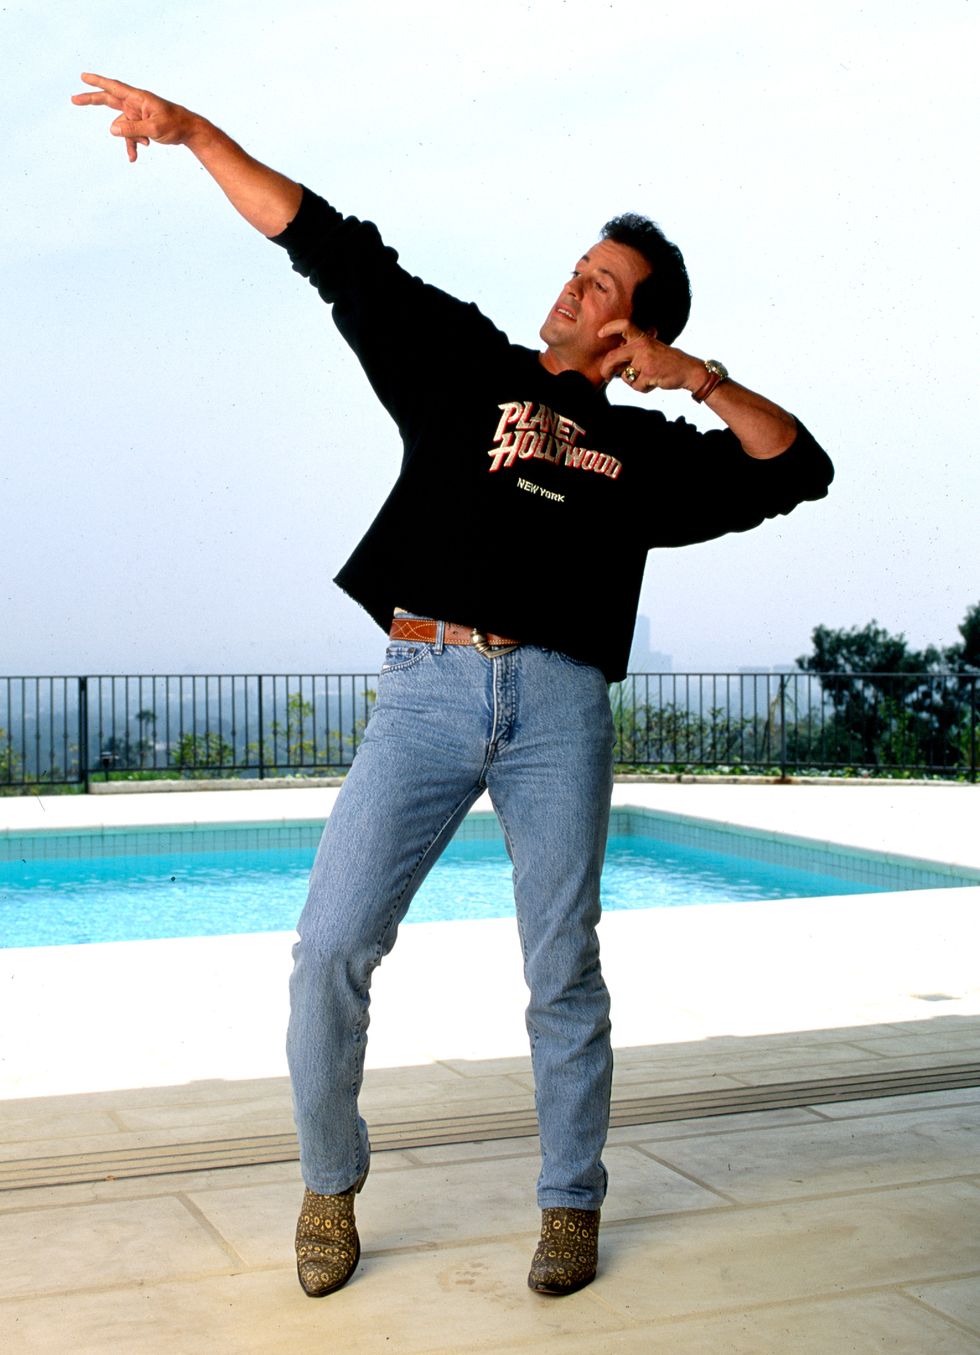 beverly hills, ca may  16, 1991 sylvester stallone beside the pool in his  beverly hills home celebrating the opening of the chain of restaurants called planet hollywood may 16, 1991, beverly hills, california photo by paul harrisgetty images